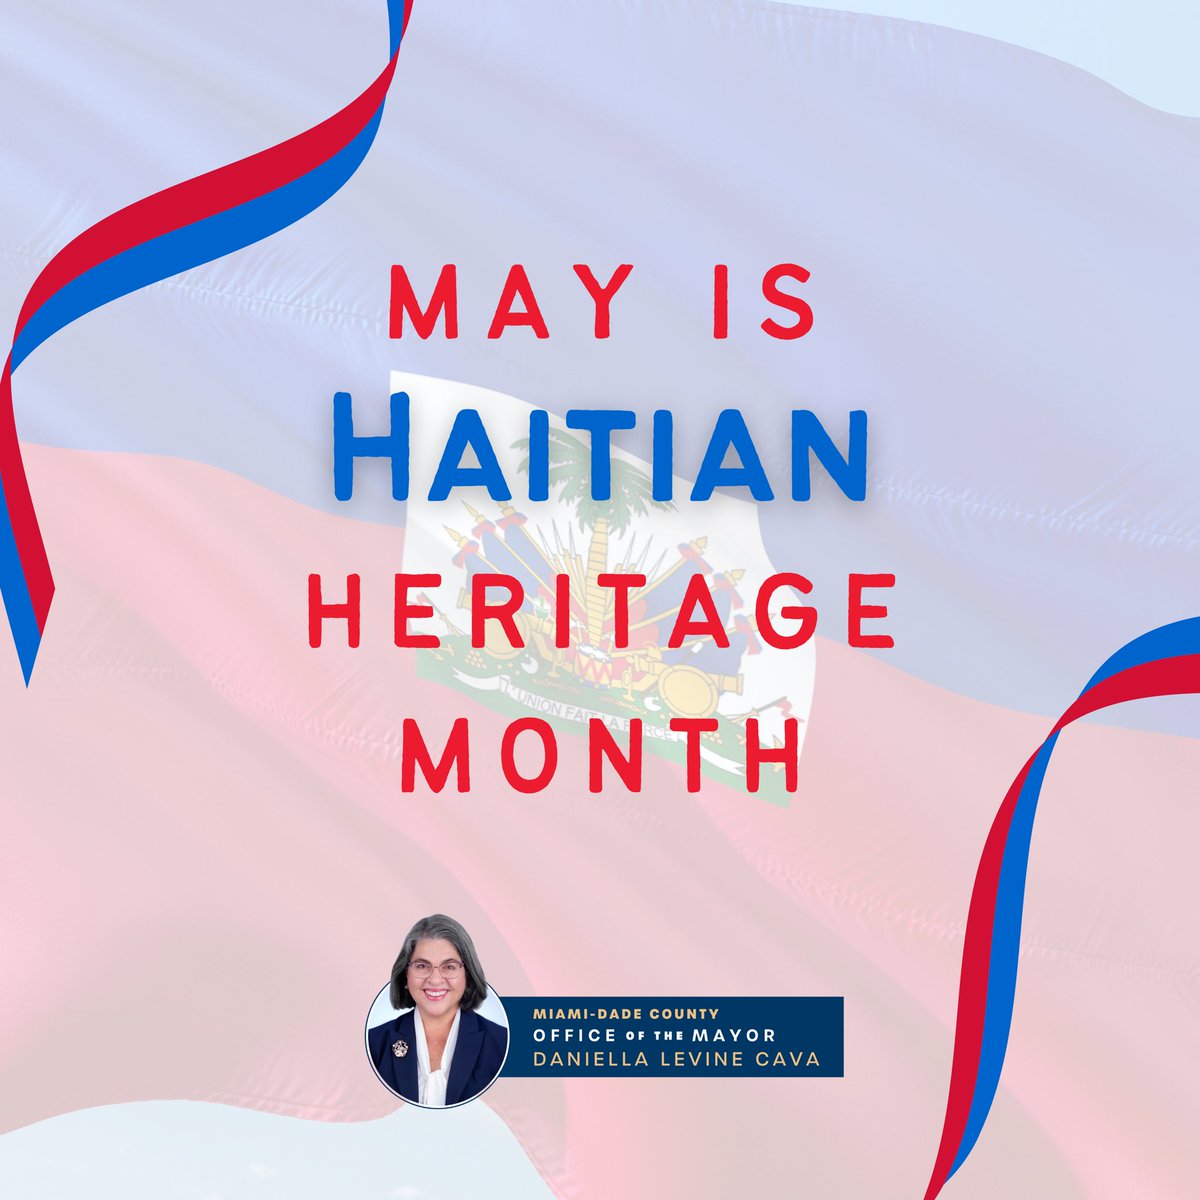 Happy #HaitianHeritageMonth! We're proud of the rich culture, history, and contributions of the Haitian community in Miami-Dade and beyond. Together, we stand with Haiti and celebrate our community. Stay tuned for our Haitian Heritage events! 🇭🇹